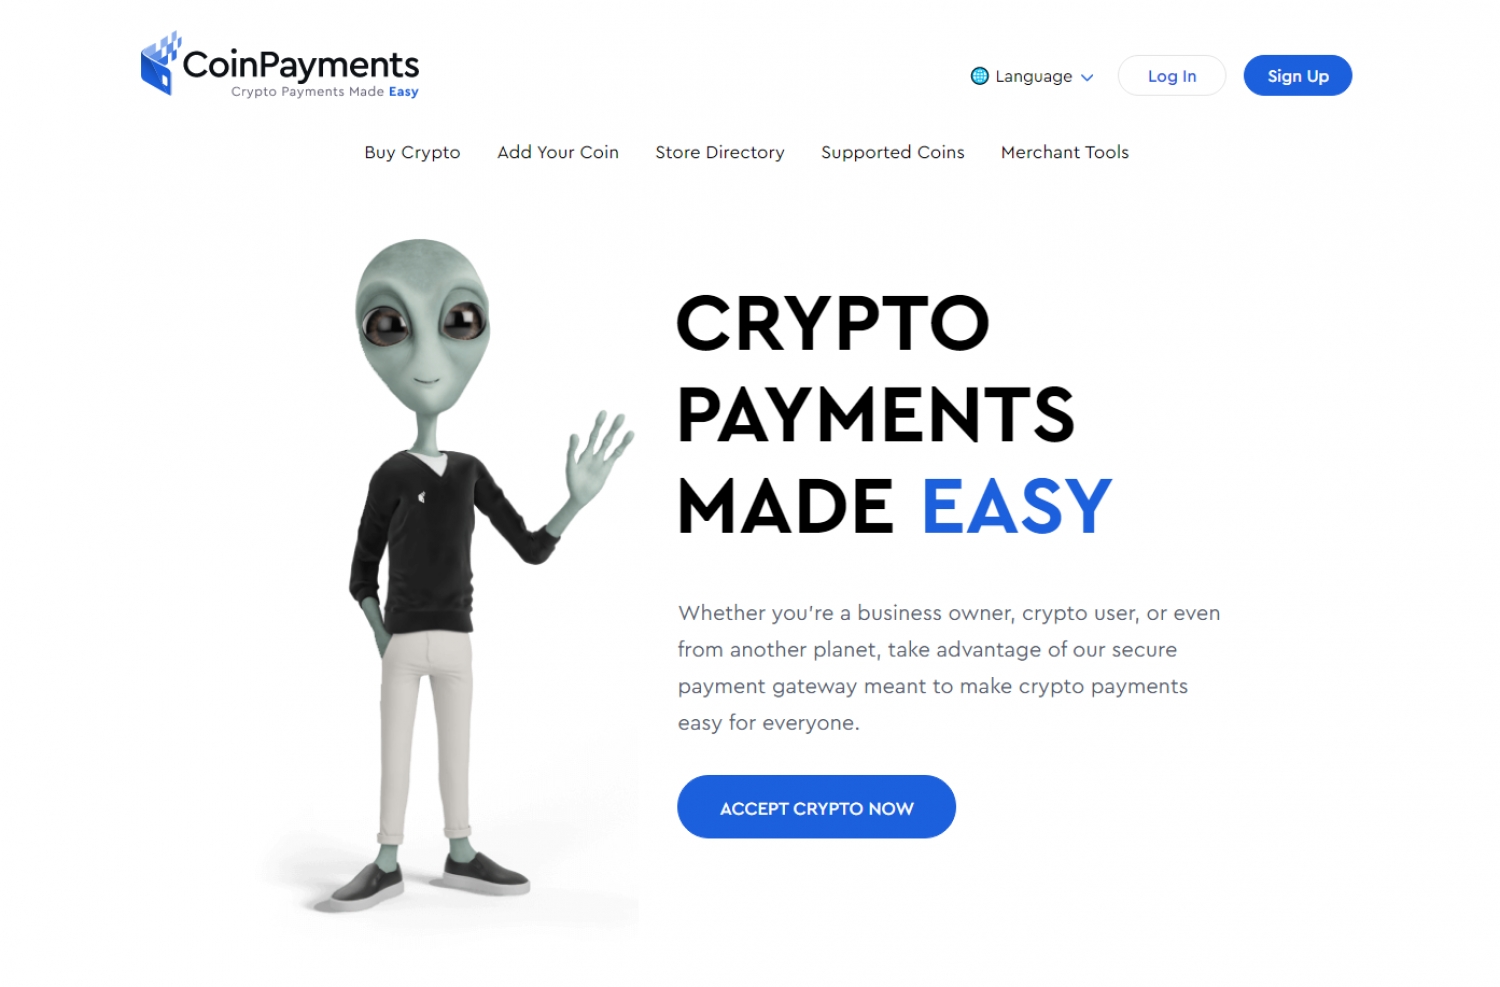 ADDED COINPAYMENTS EXCHANGE CRYPTOCURRENCY WALLETS